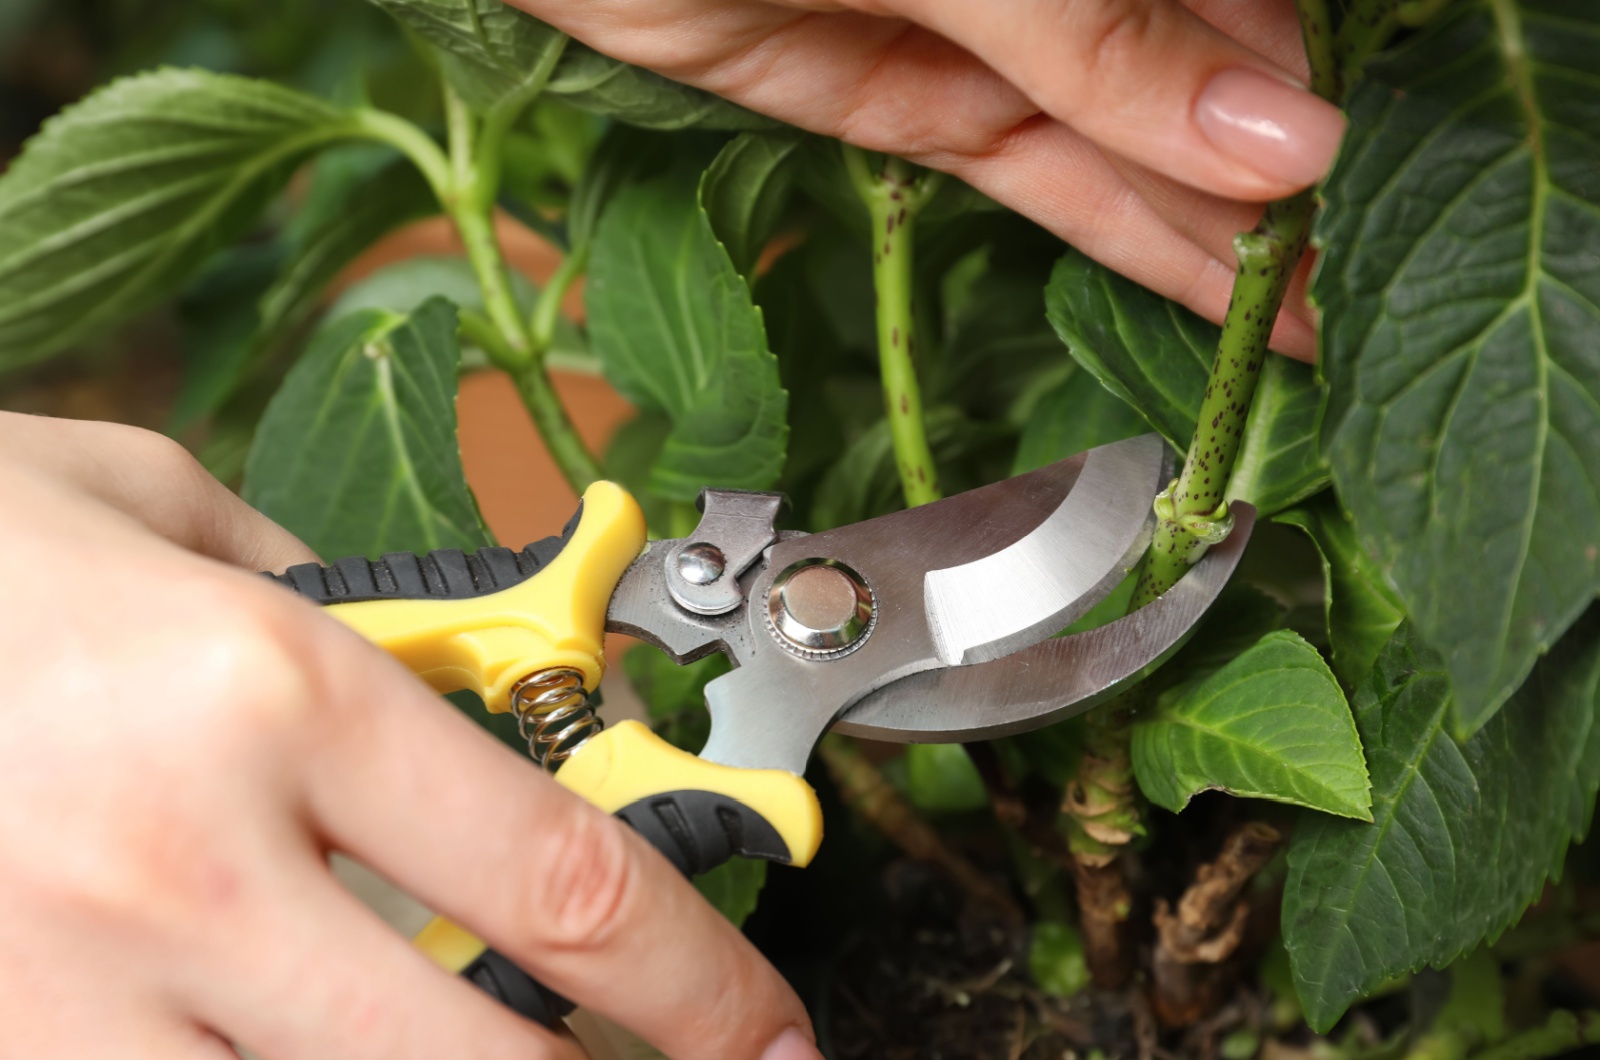 Woman pruning plant with shears